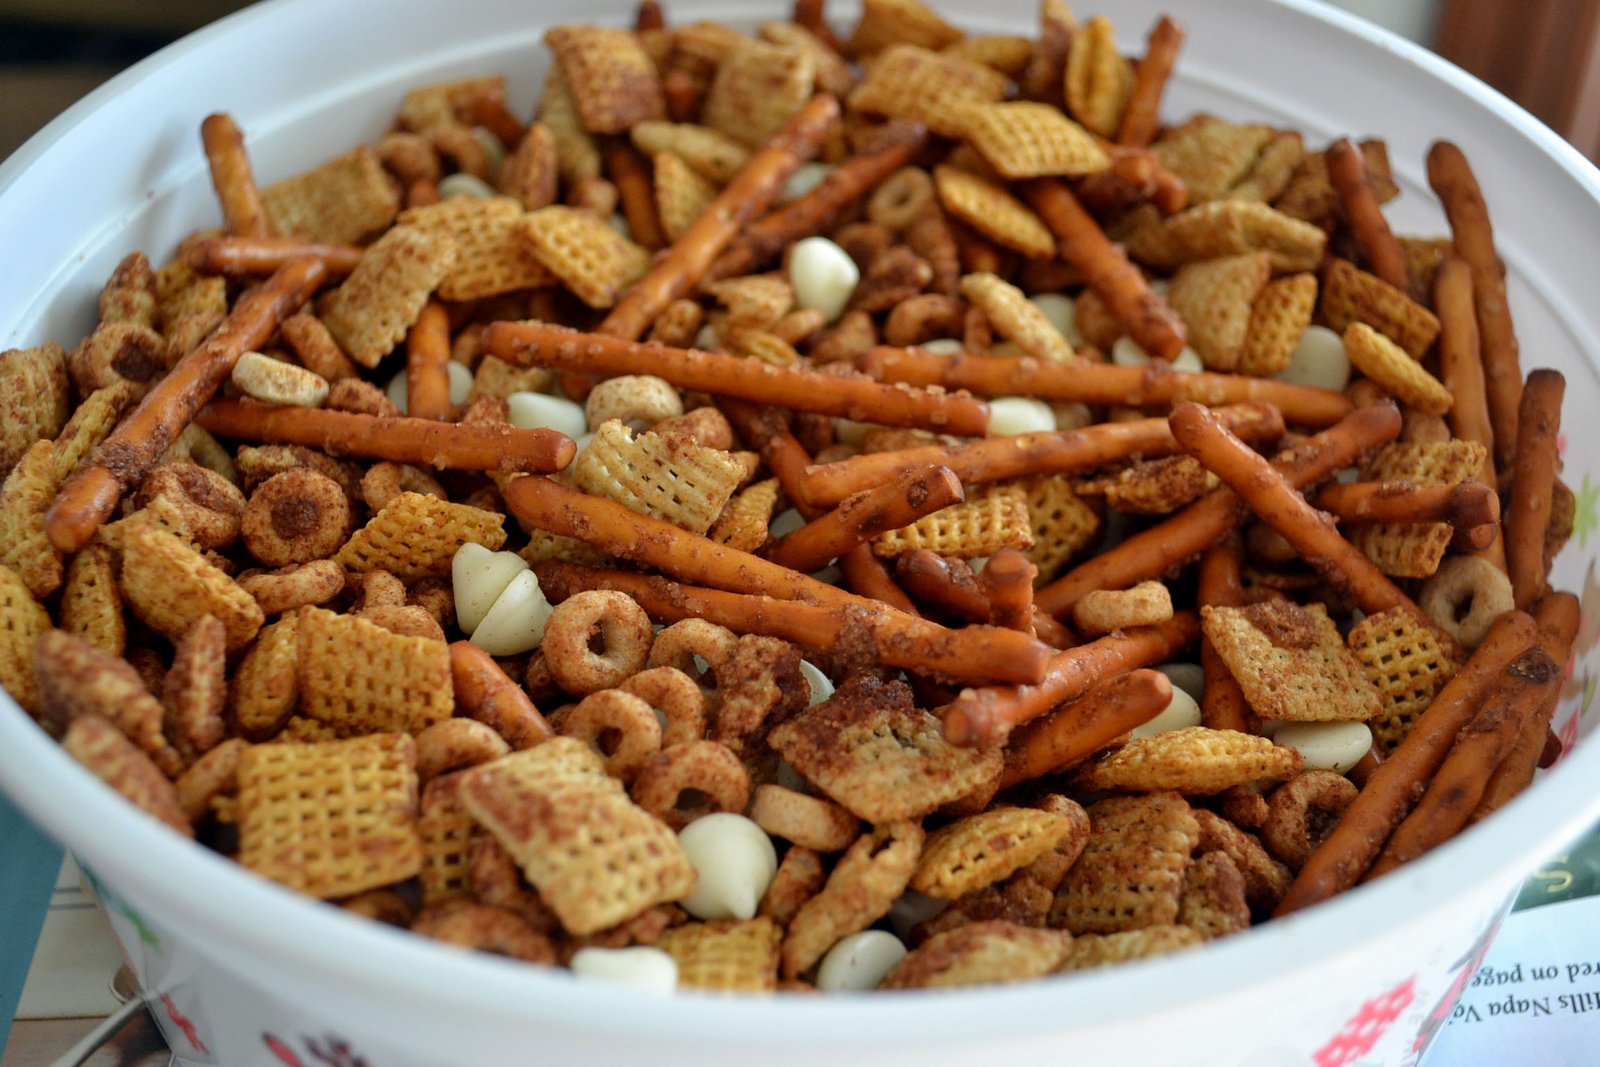 Chex Mix or Nuts and Bolts